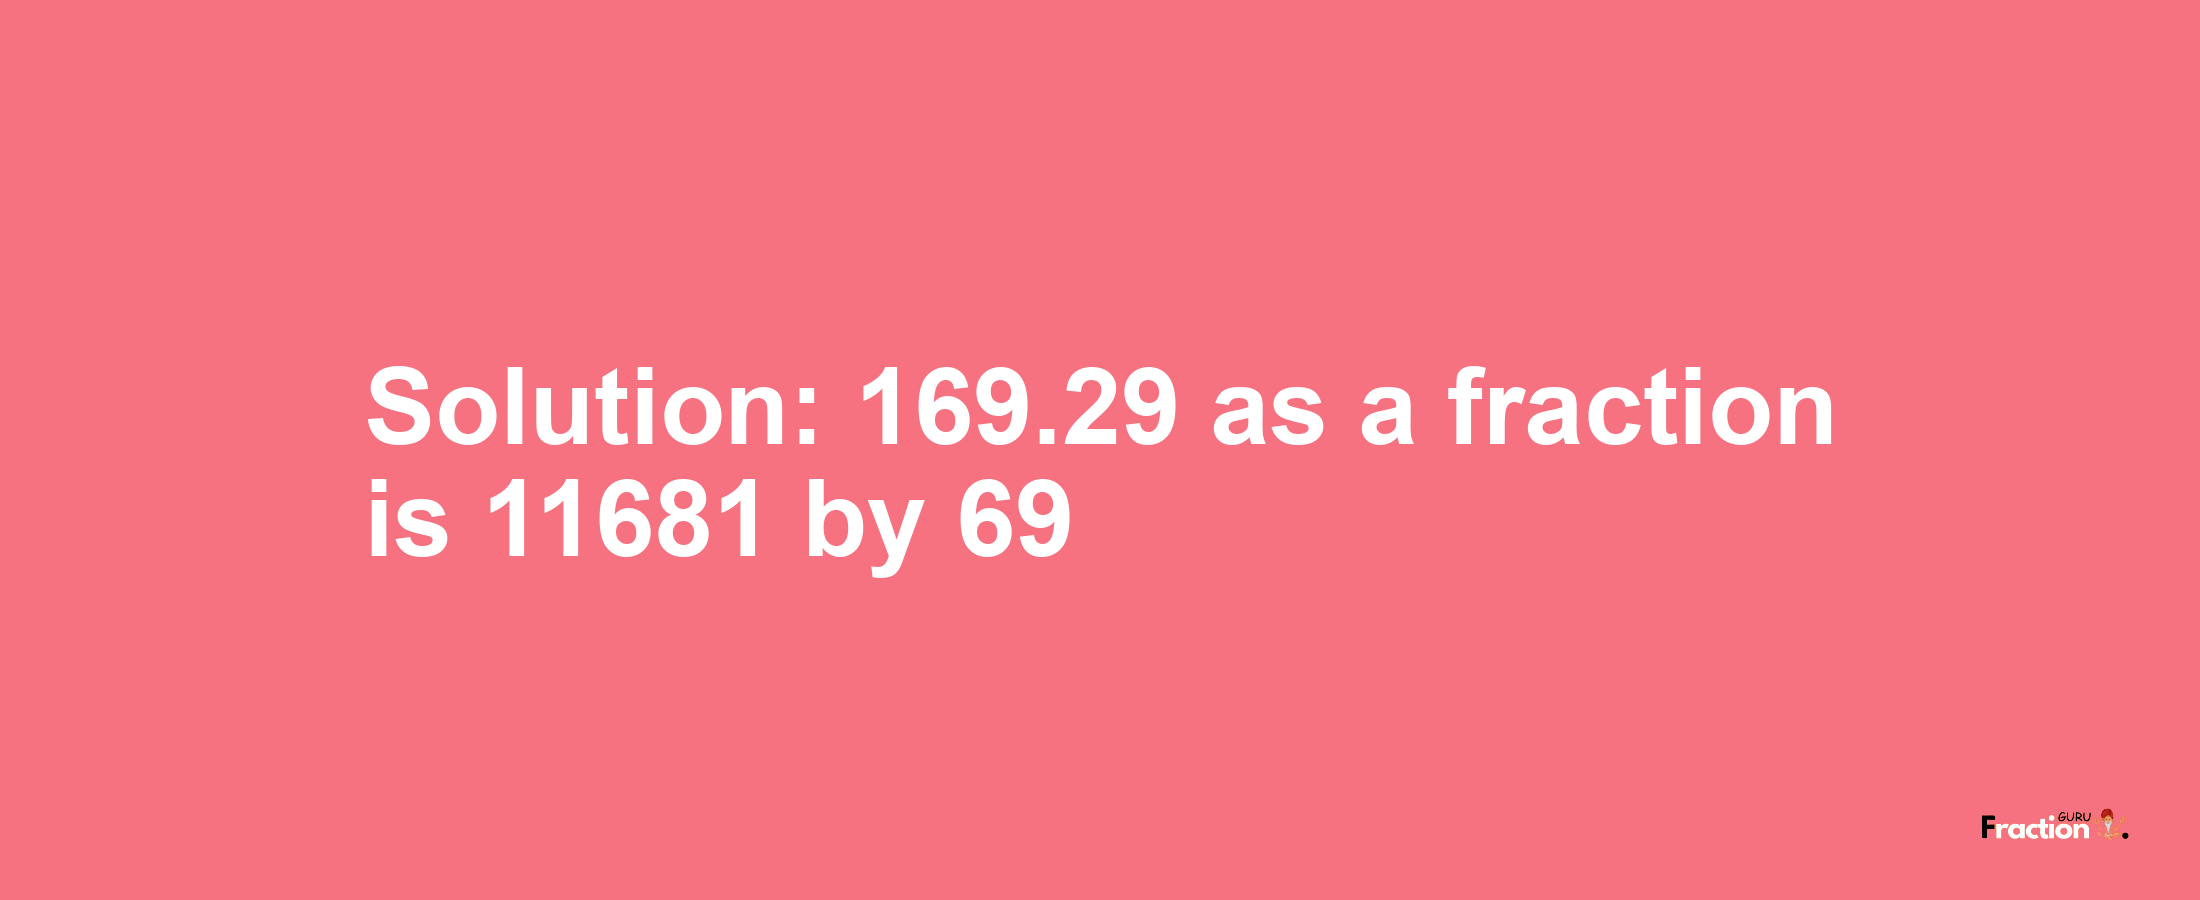 Solution:169.29 as a fraction is 11681/69